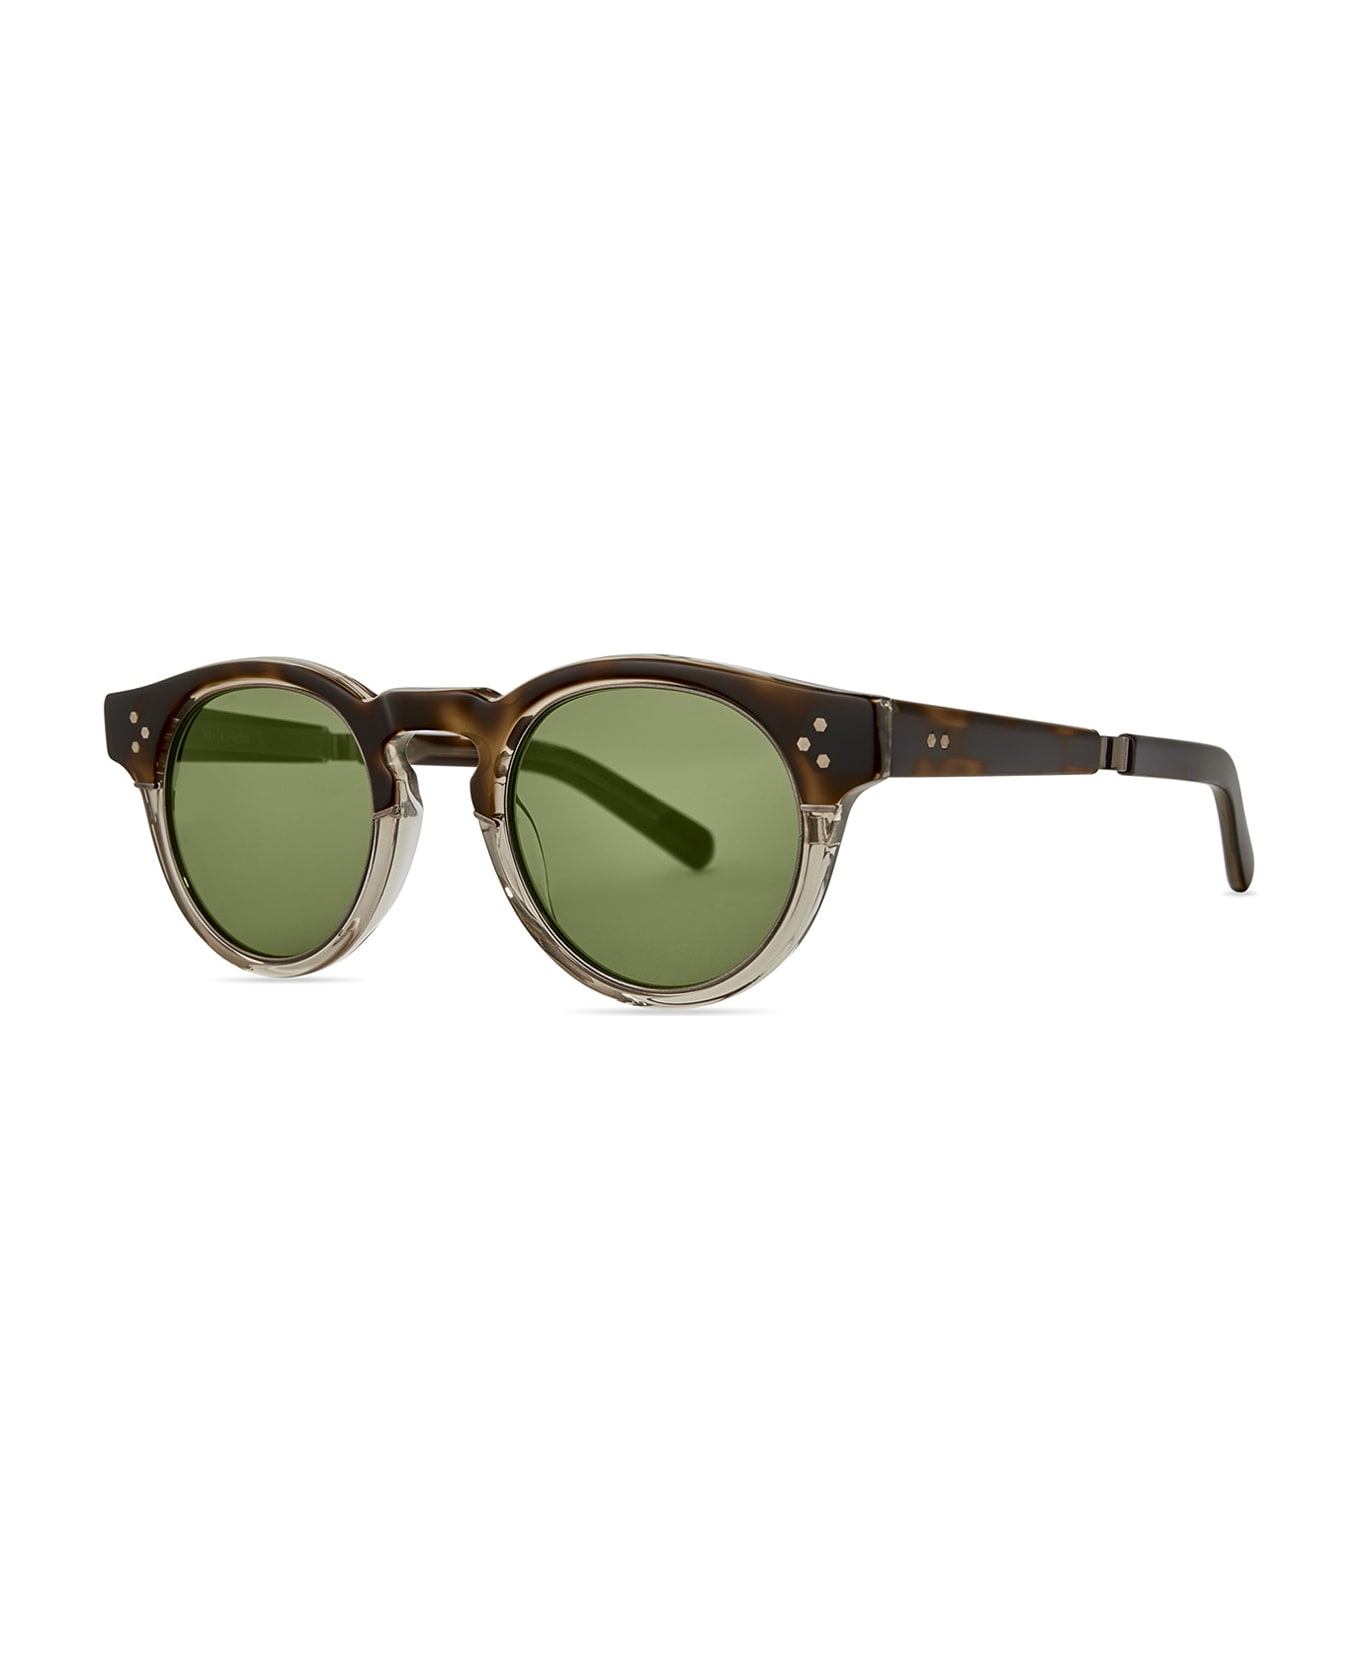 Mr. Leight Kennedy S Honeycomb Laminate-antique Gold/green Sunglasses - Honeycomb Laminate-Antique Gold/Green